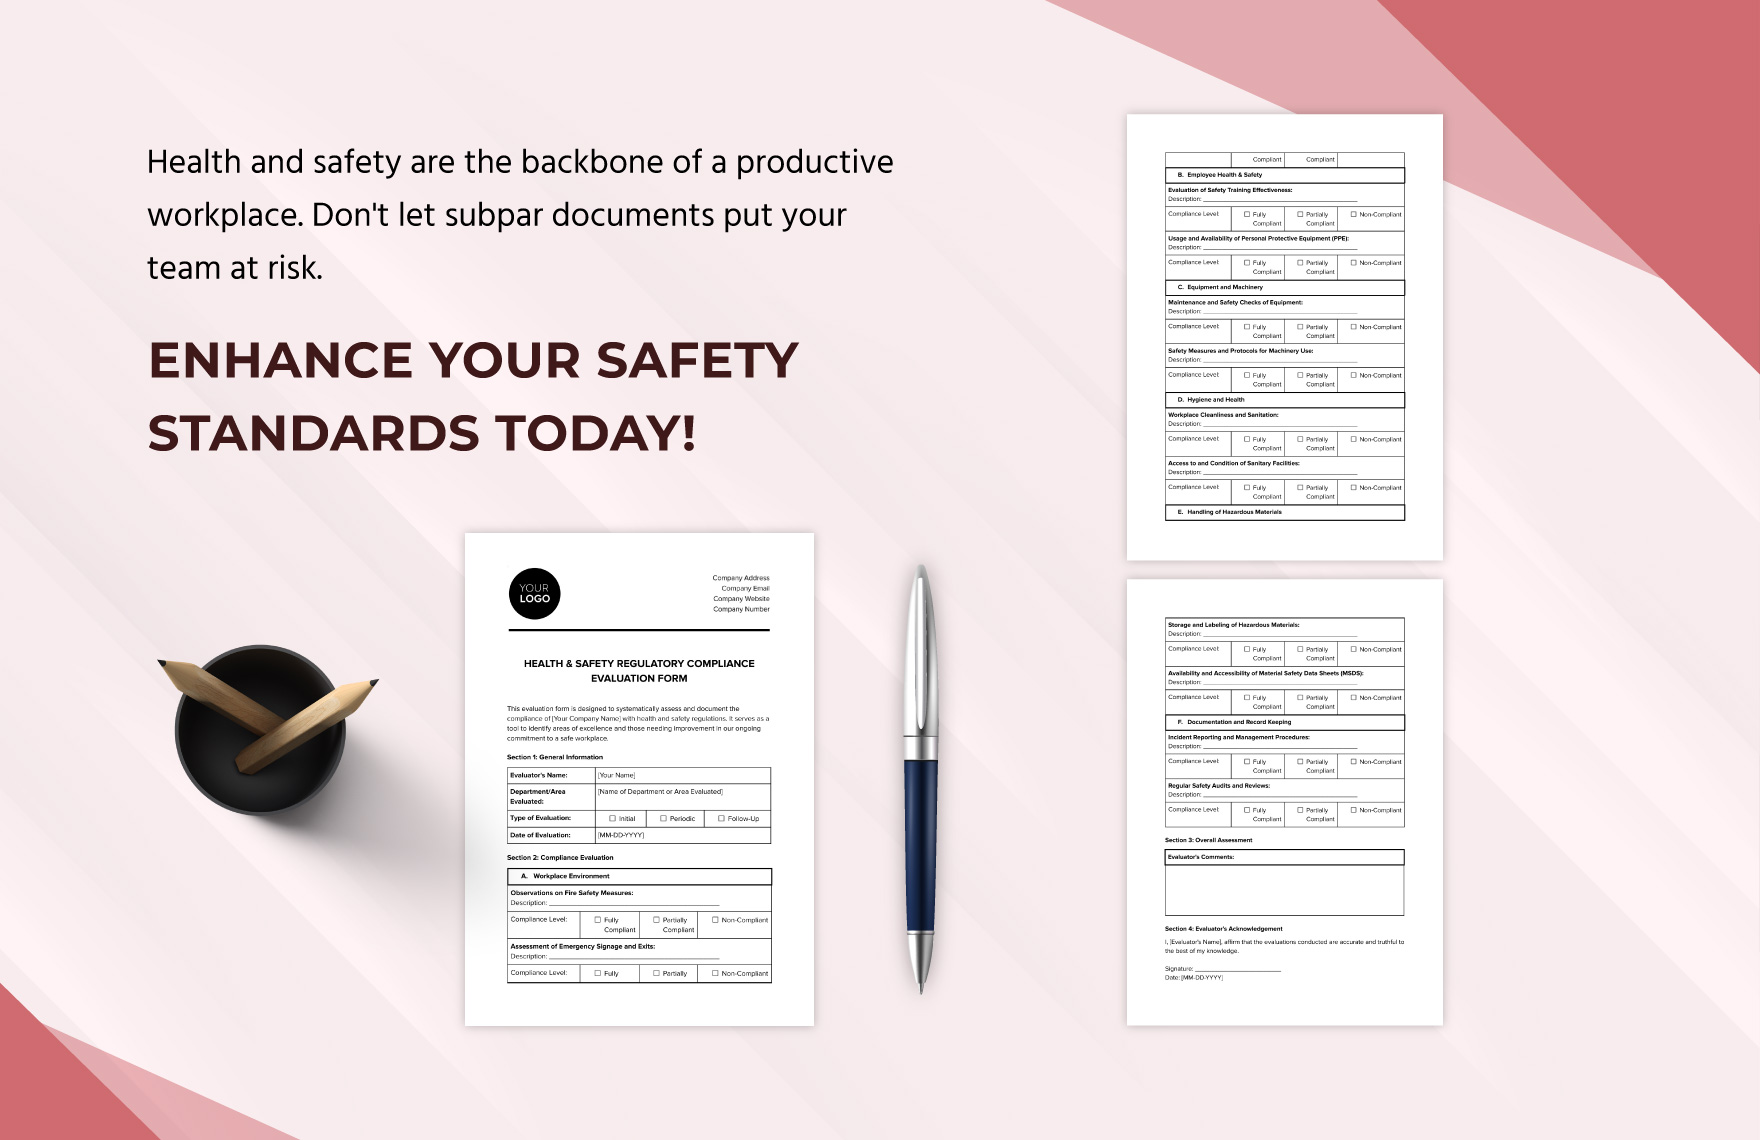 Health & Safety Regulatory Compliance Evaluation Form Template